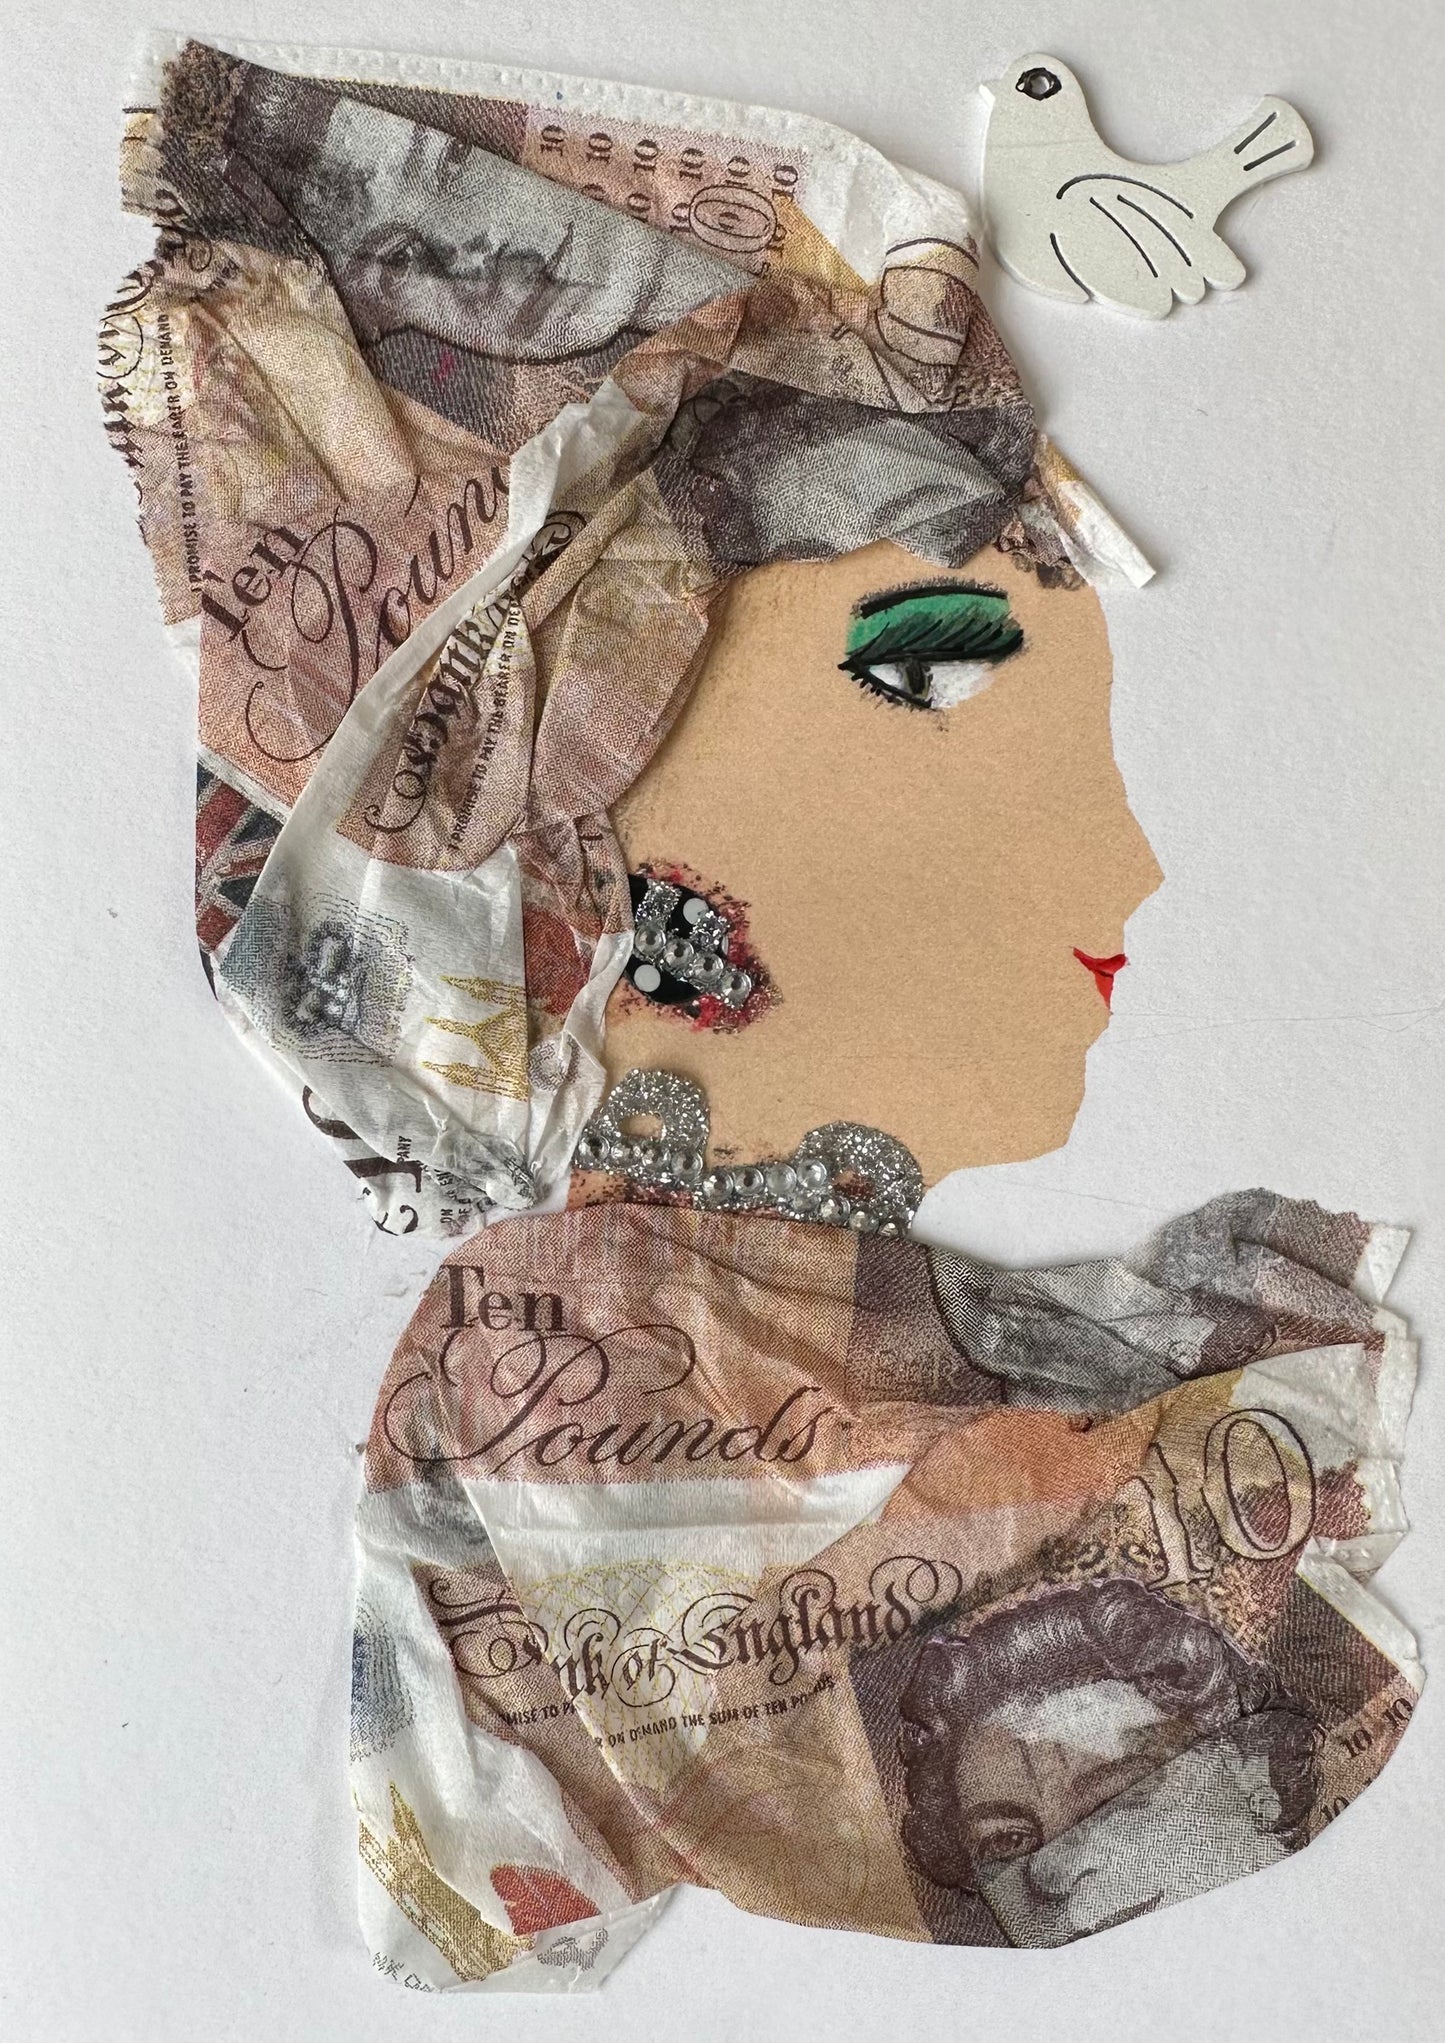 I created this handmade card of a woman dressed in tissue material money. She has silver colored jewellery as well as a dove in the right corner.